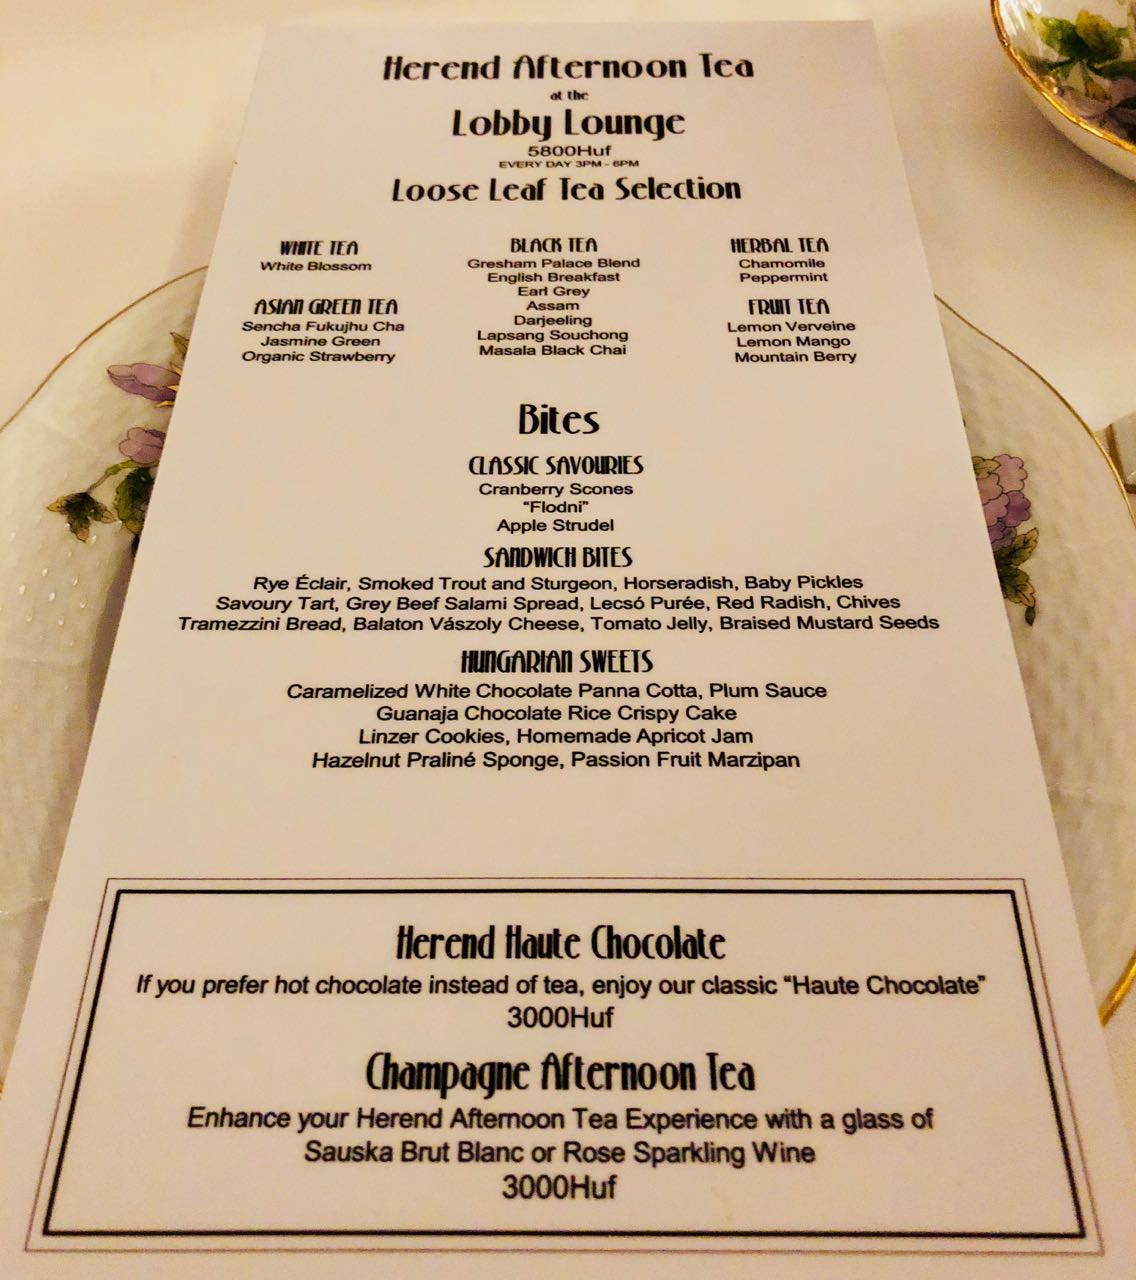 Herend Afternoon Tea Four Seasons Budapest review menu